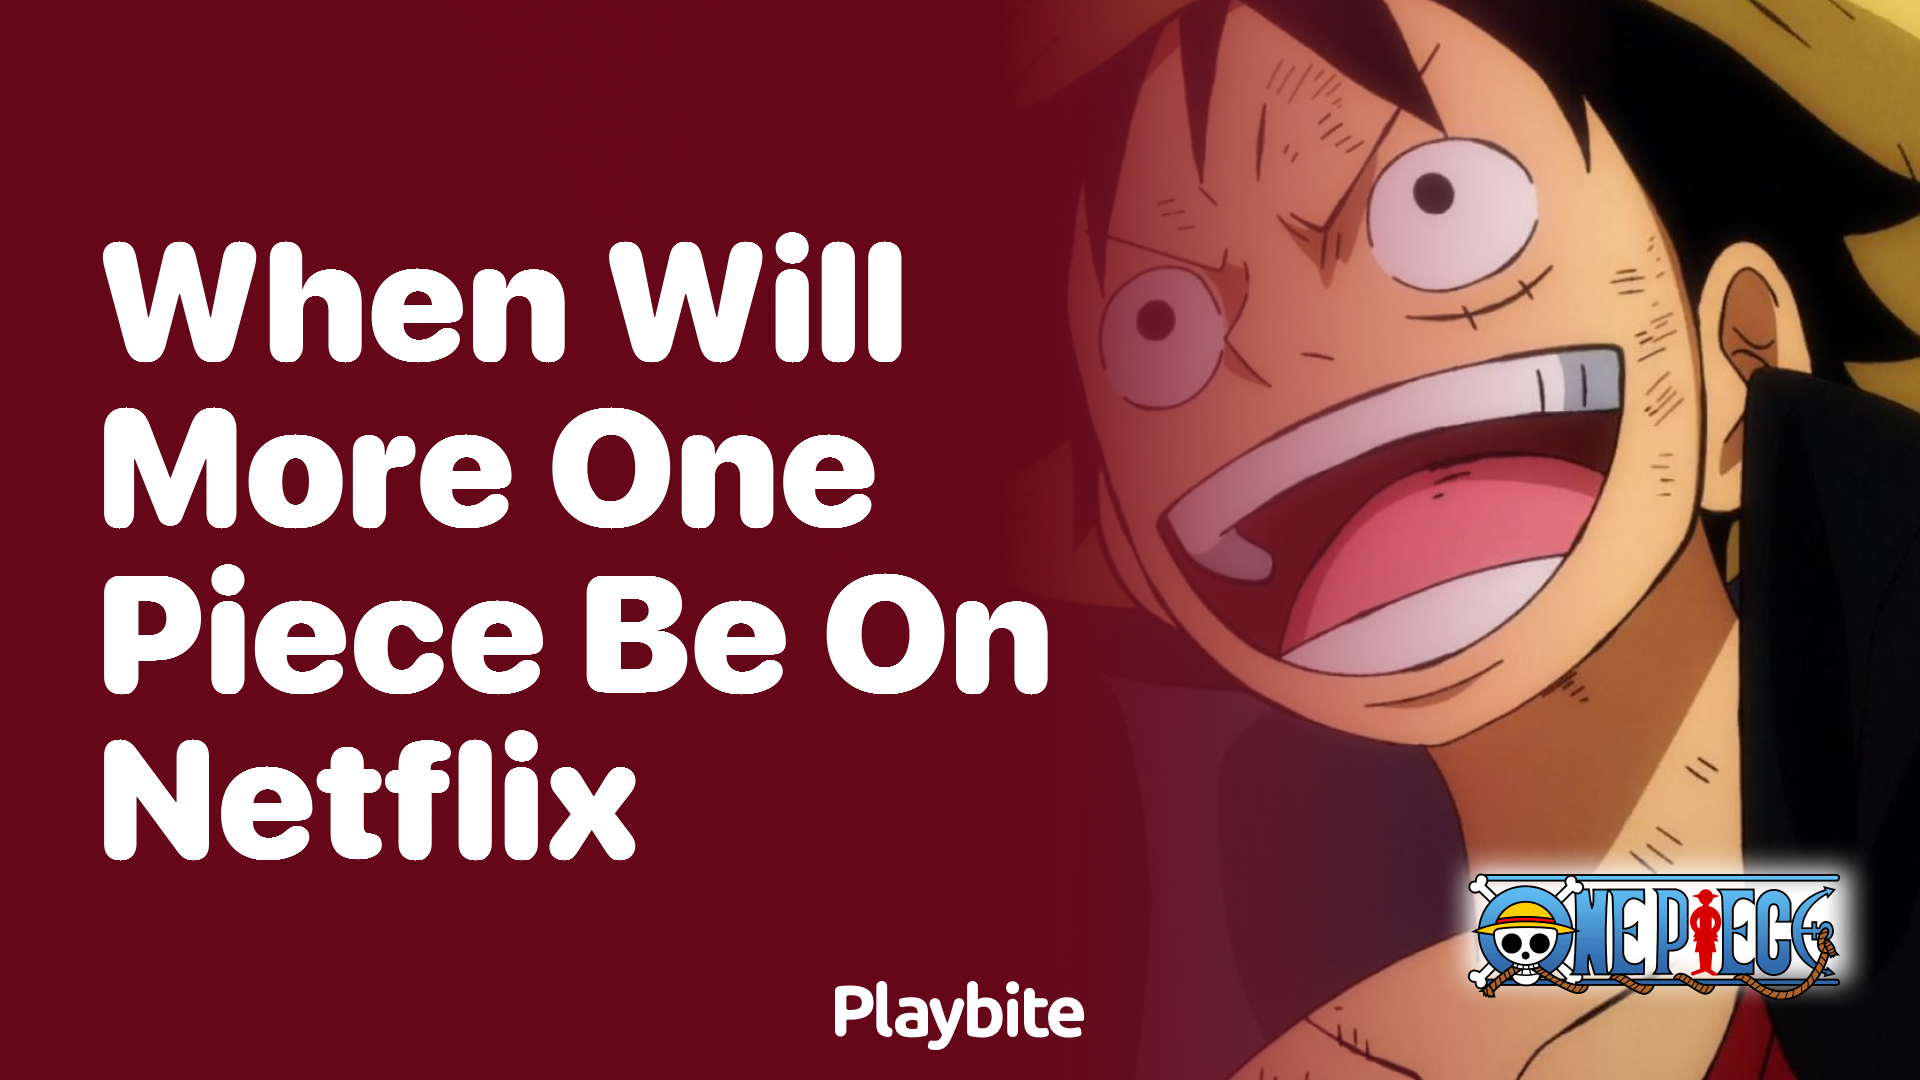 When will more One Piece be on Netflix?